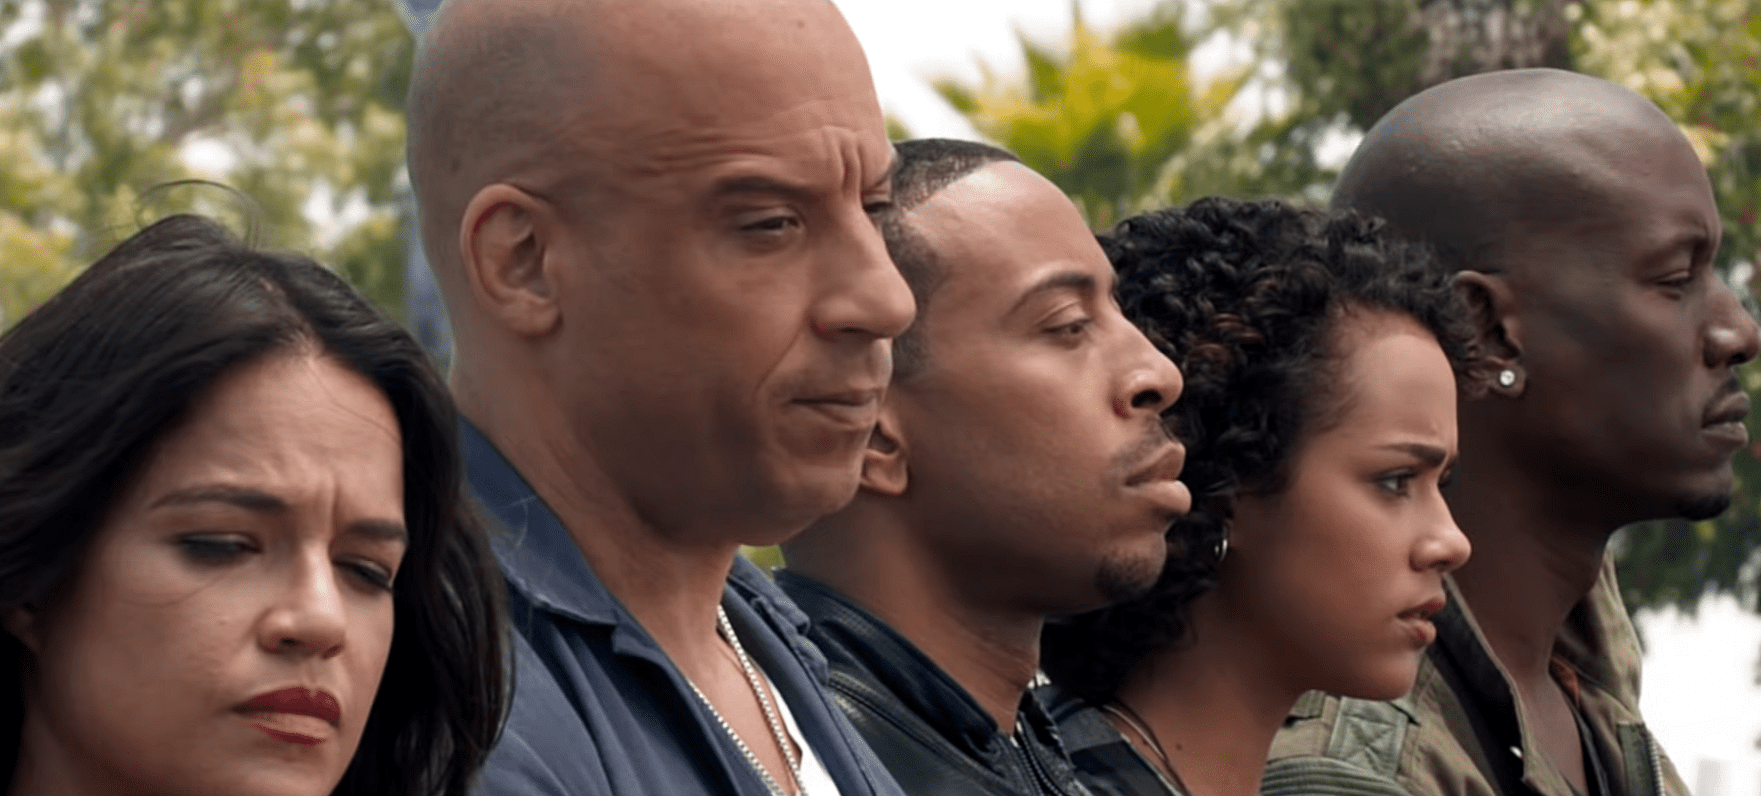 The Fast And The Furious facts